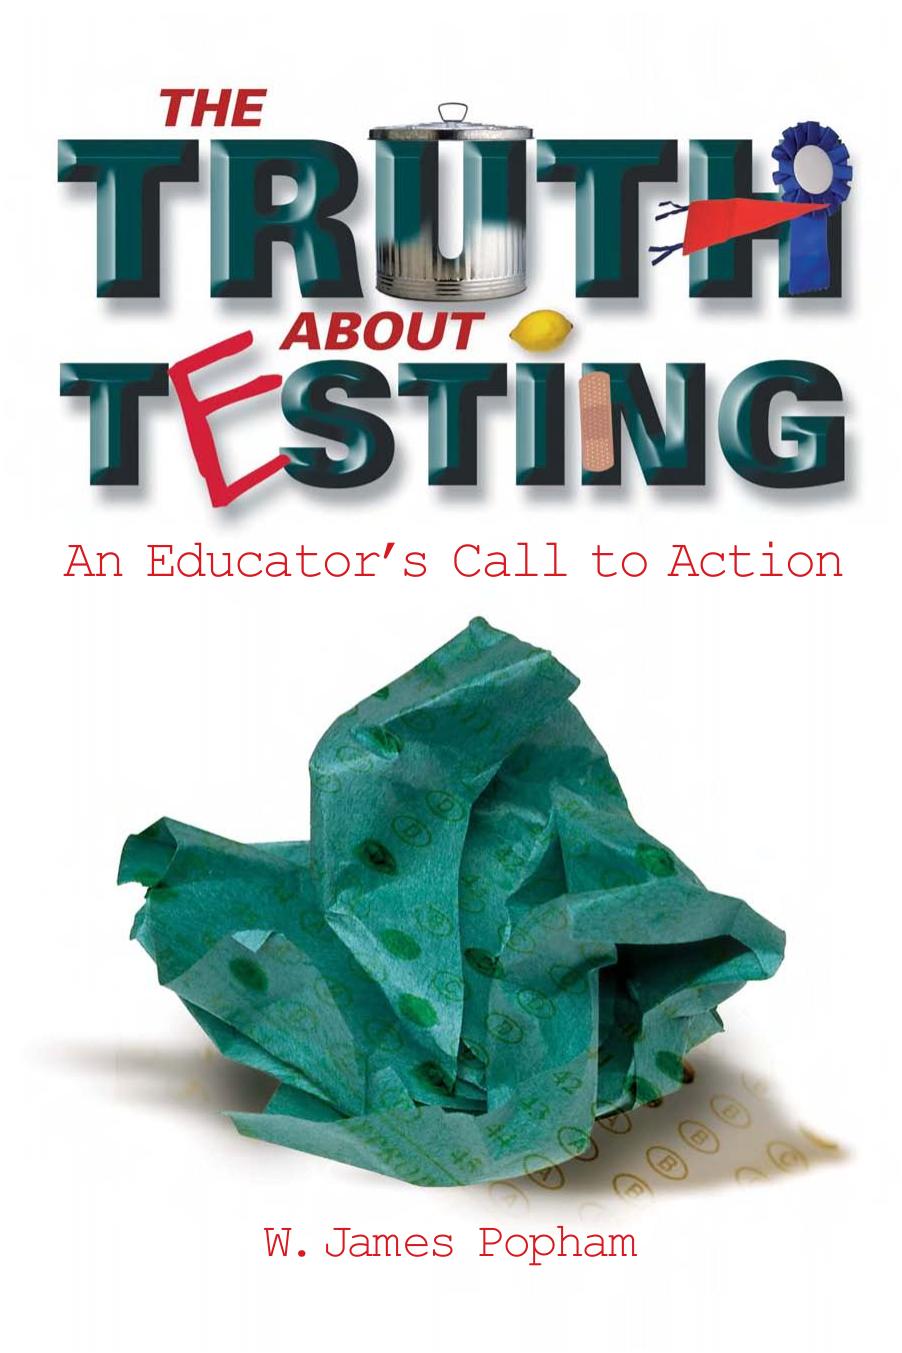 The Truth About Testing: An Educator's Call to Action